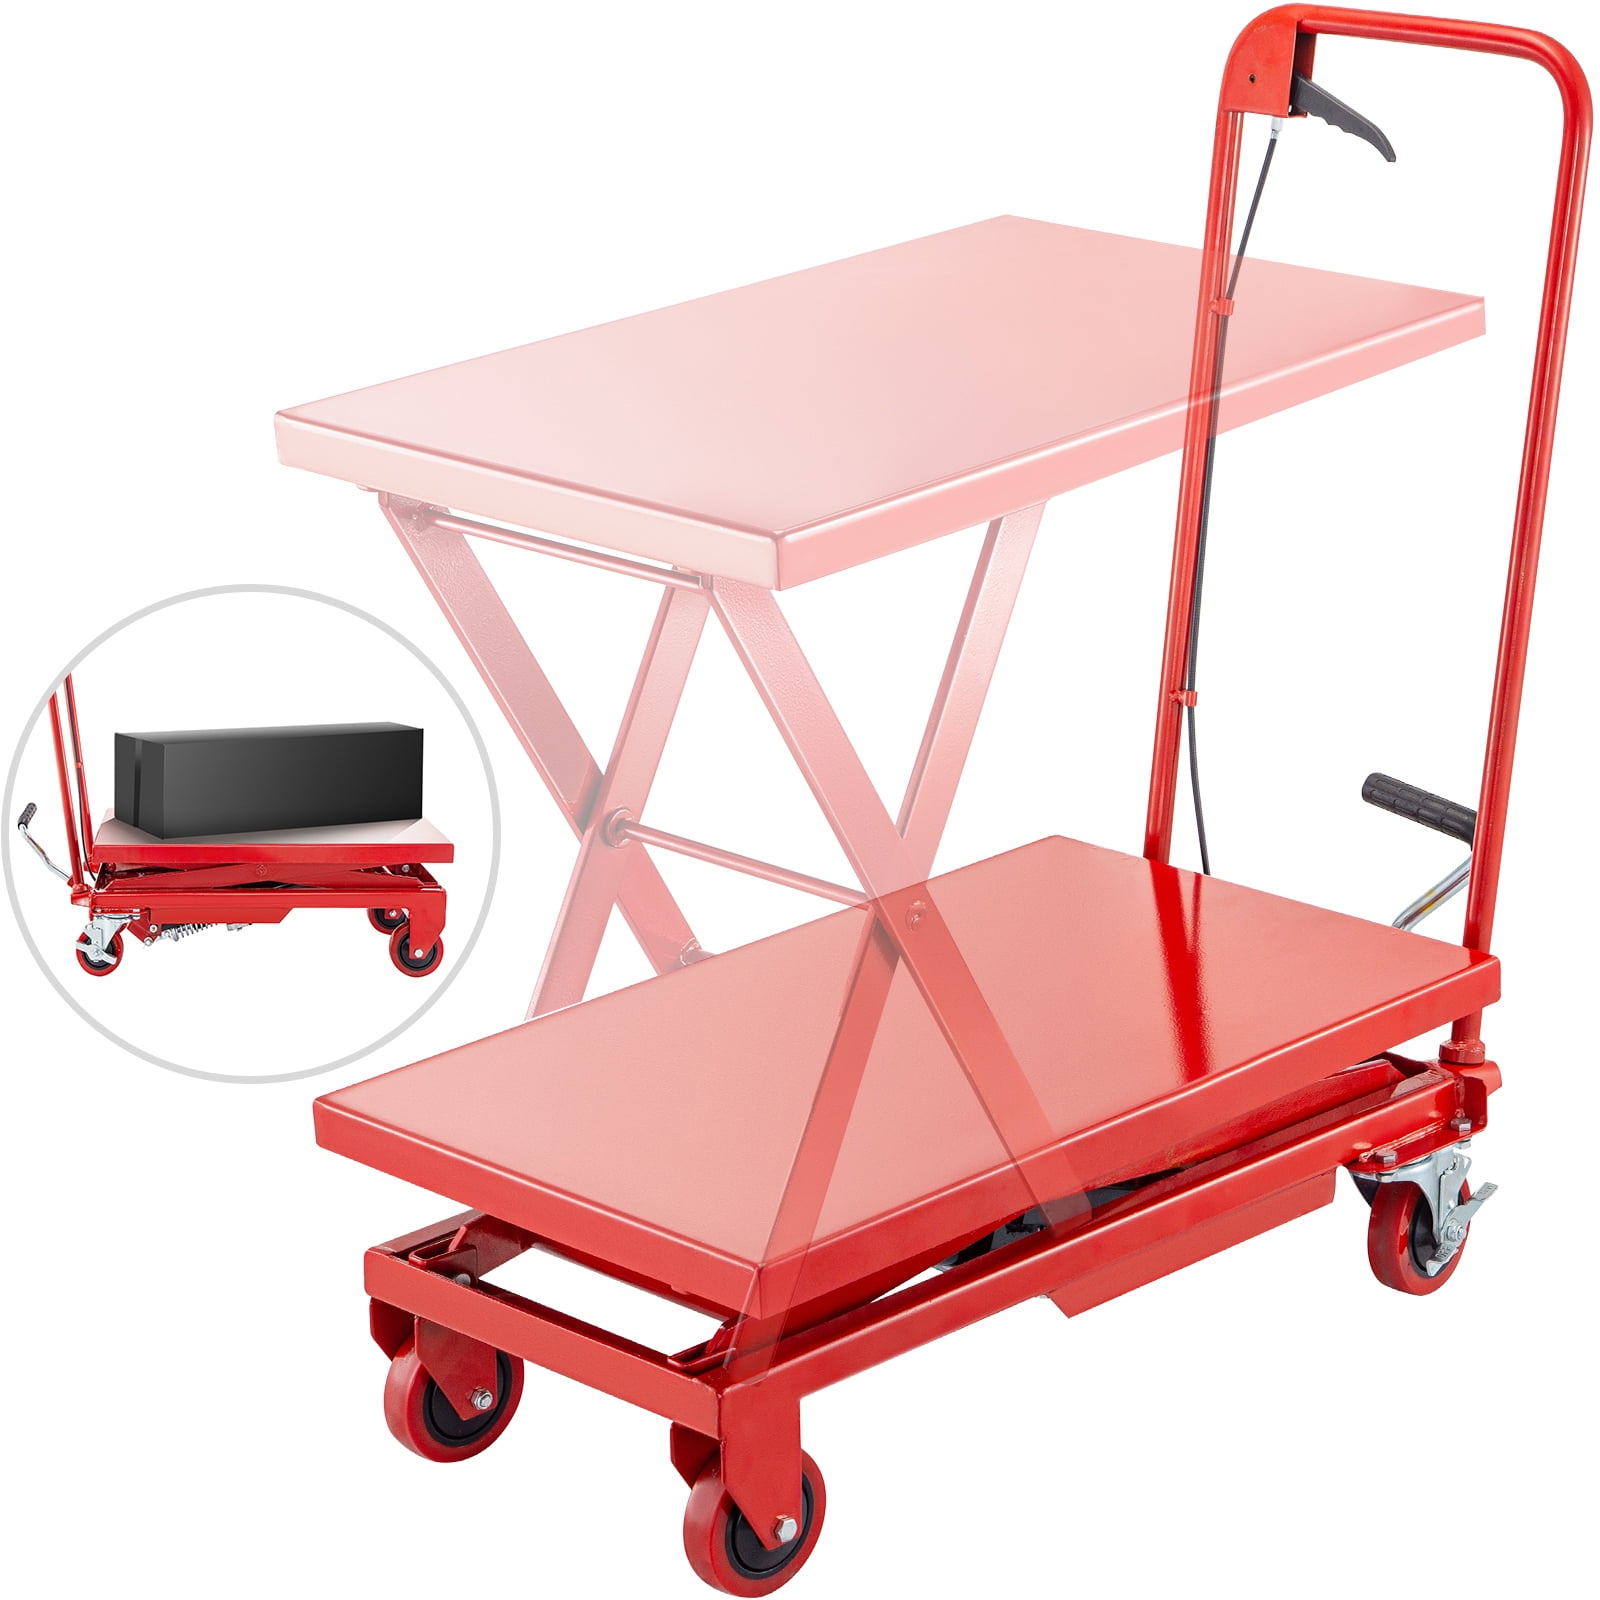 770lbs Capacity Hydraulic Scissor Cart Double Scissor Lift Cart w/Foot Pump VEVOR Hydraulic Lift Table Cart 27.6 x 17.7 Table Size 51.2 Lifting Height Scissor Lift Table for Freight Lifting